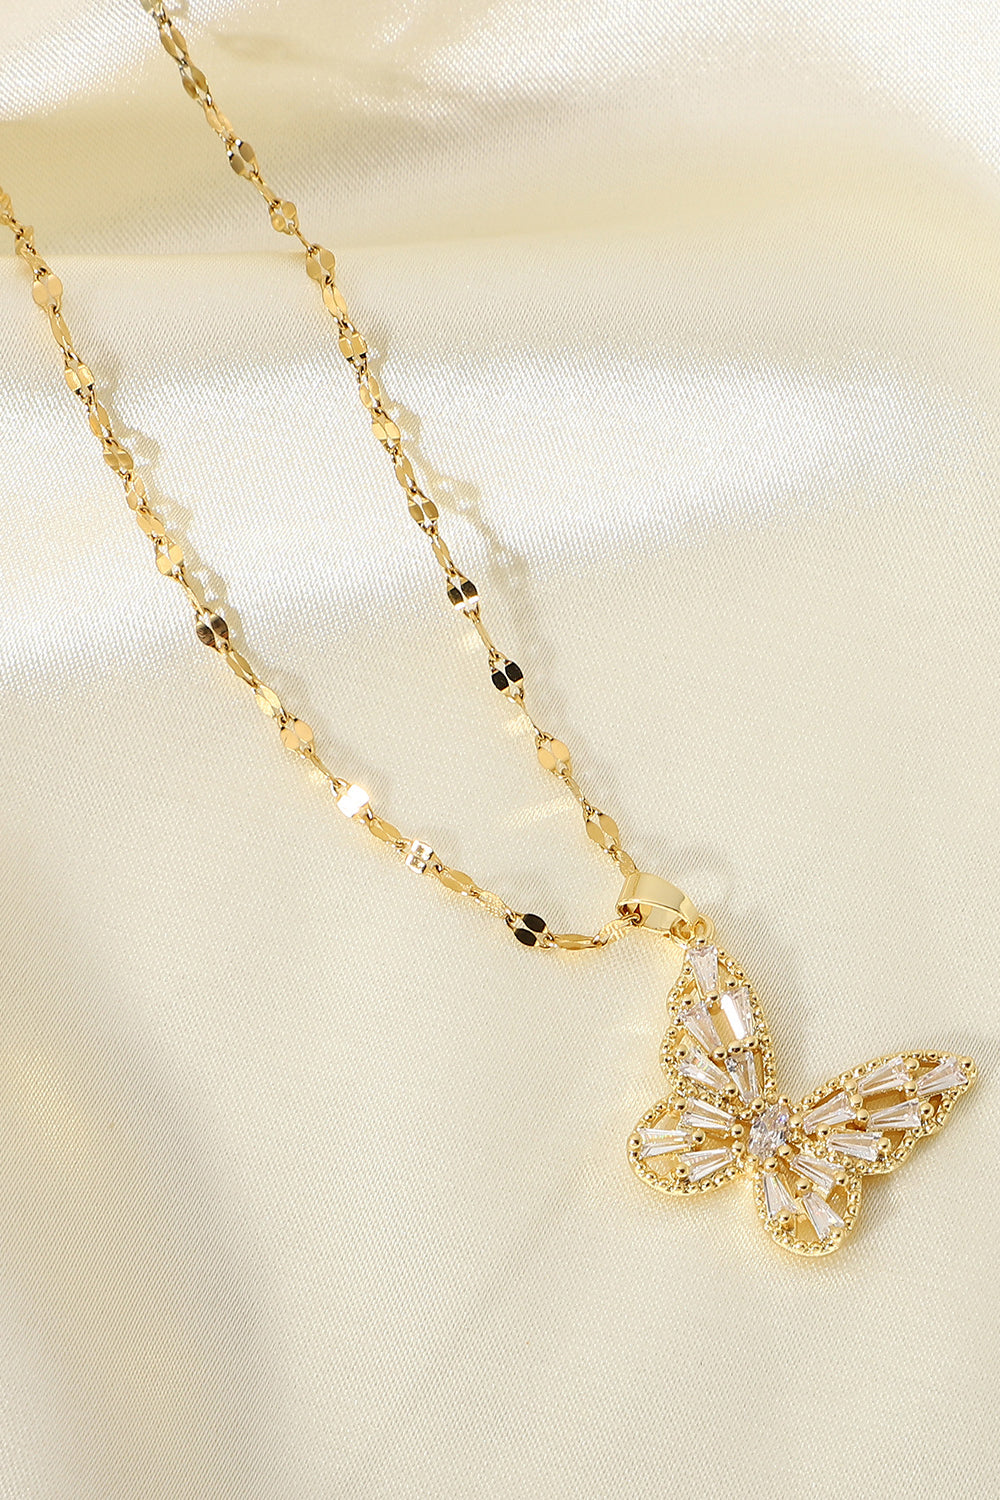 18K Gold Plated Butterfly Pendant Necklace